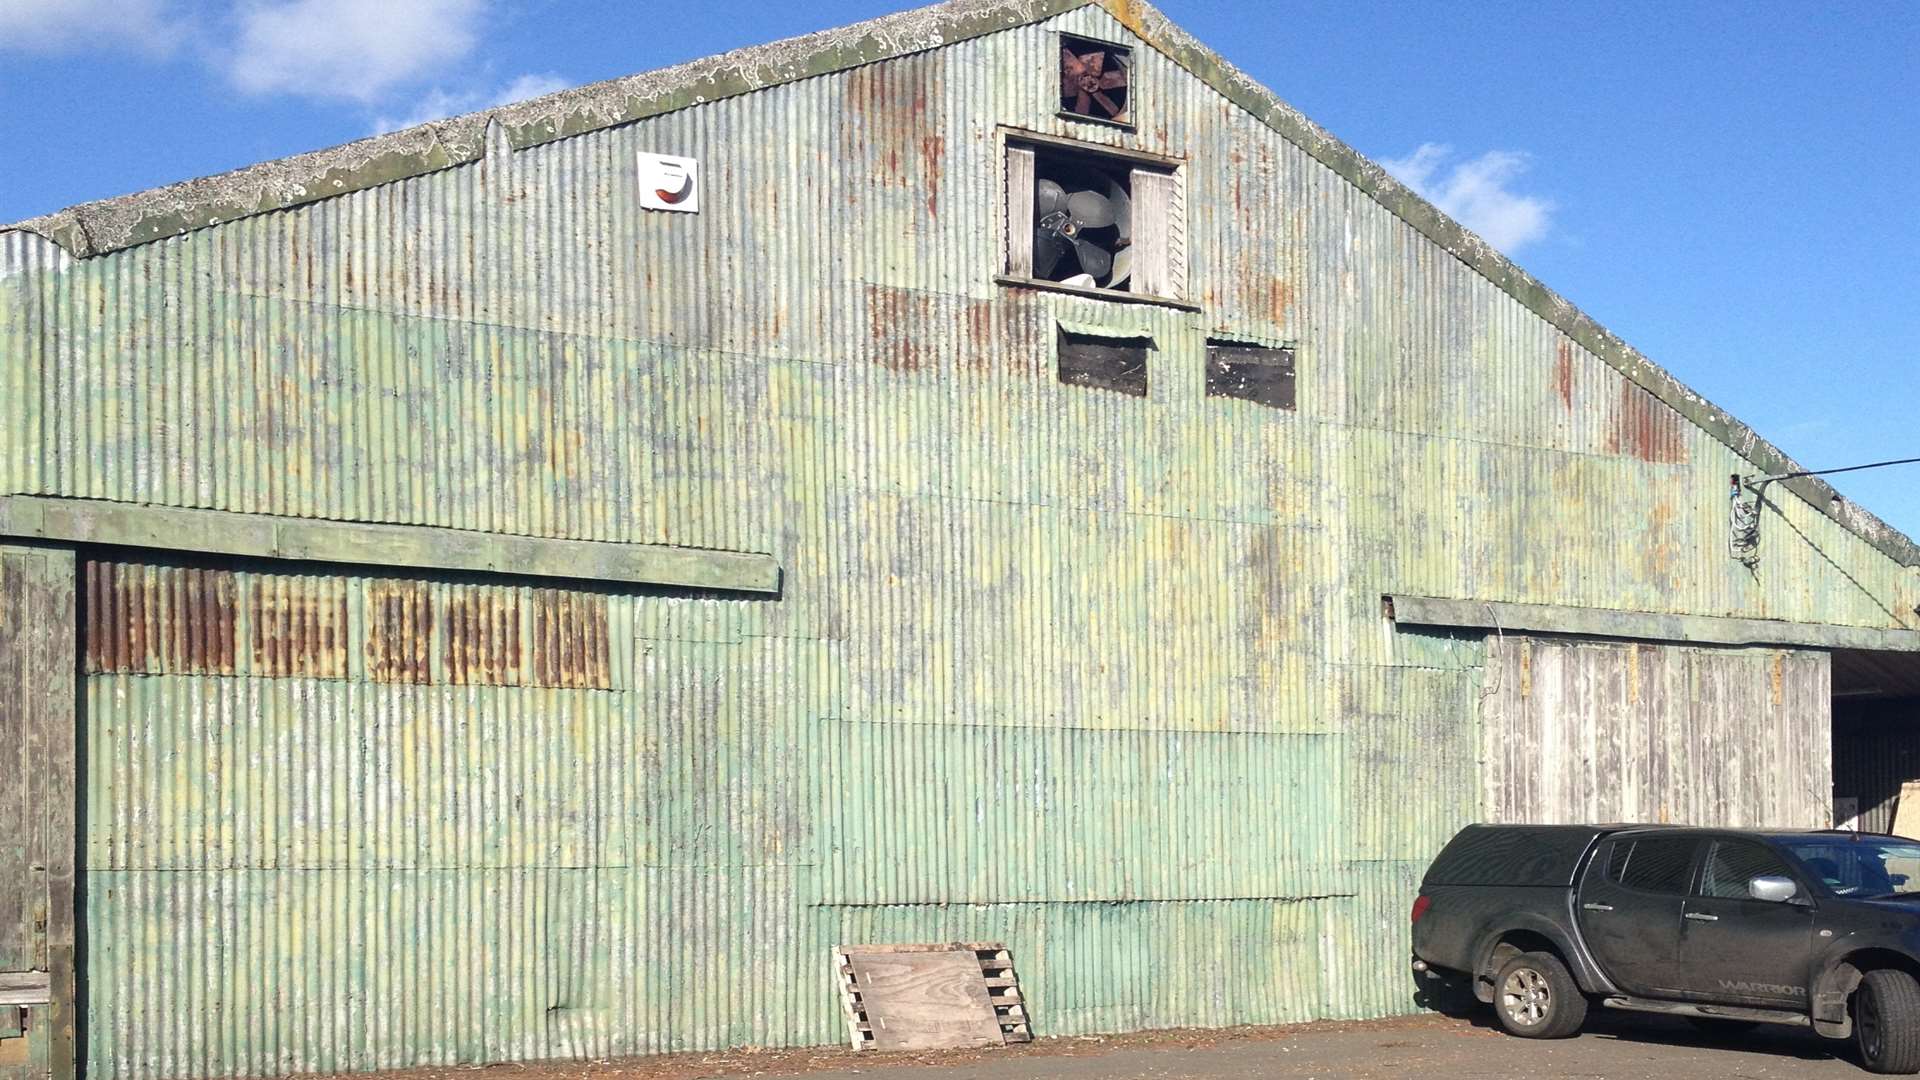 The barn in East Peckham where the cannabis factory was concealed